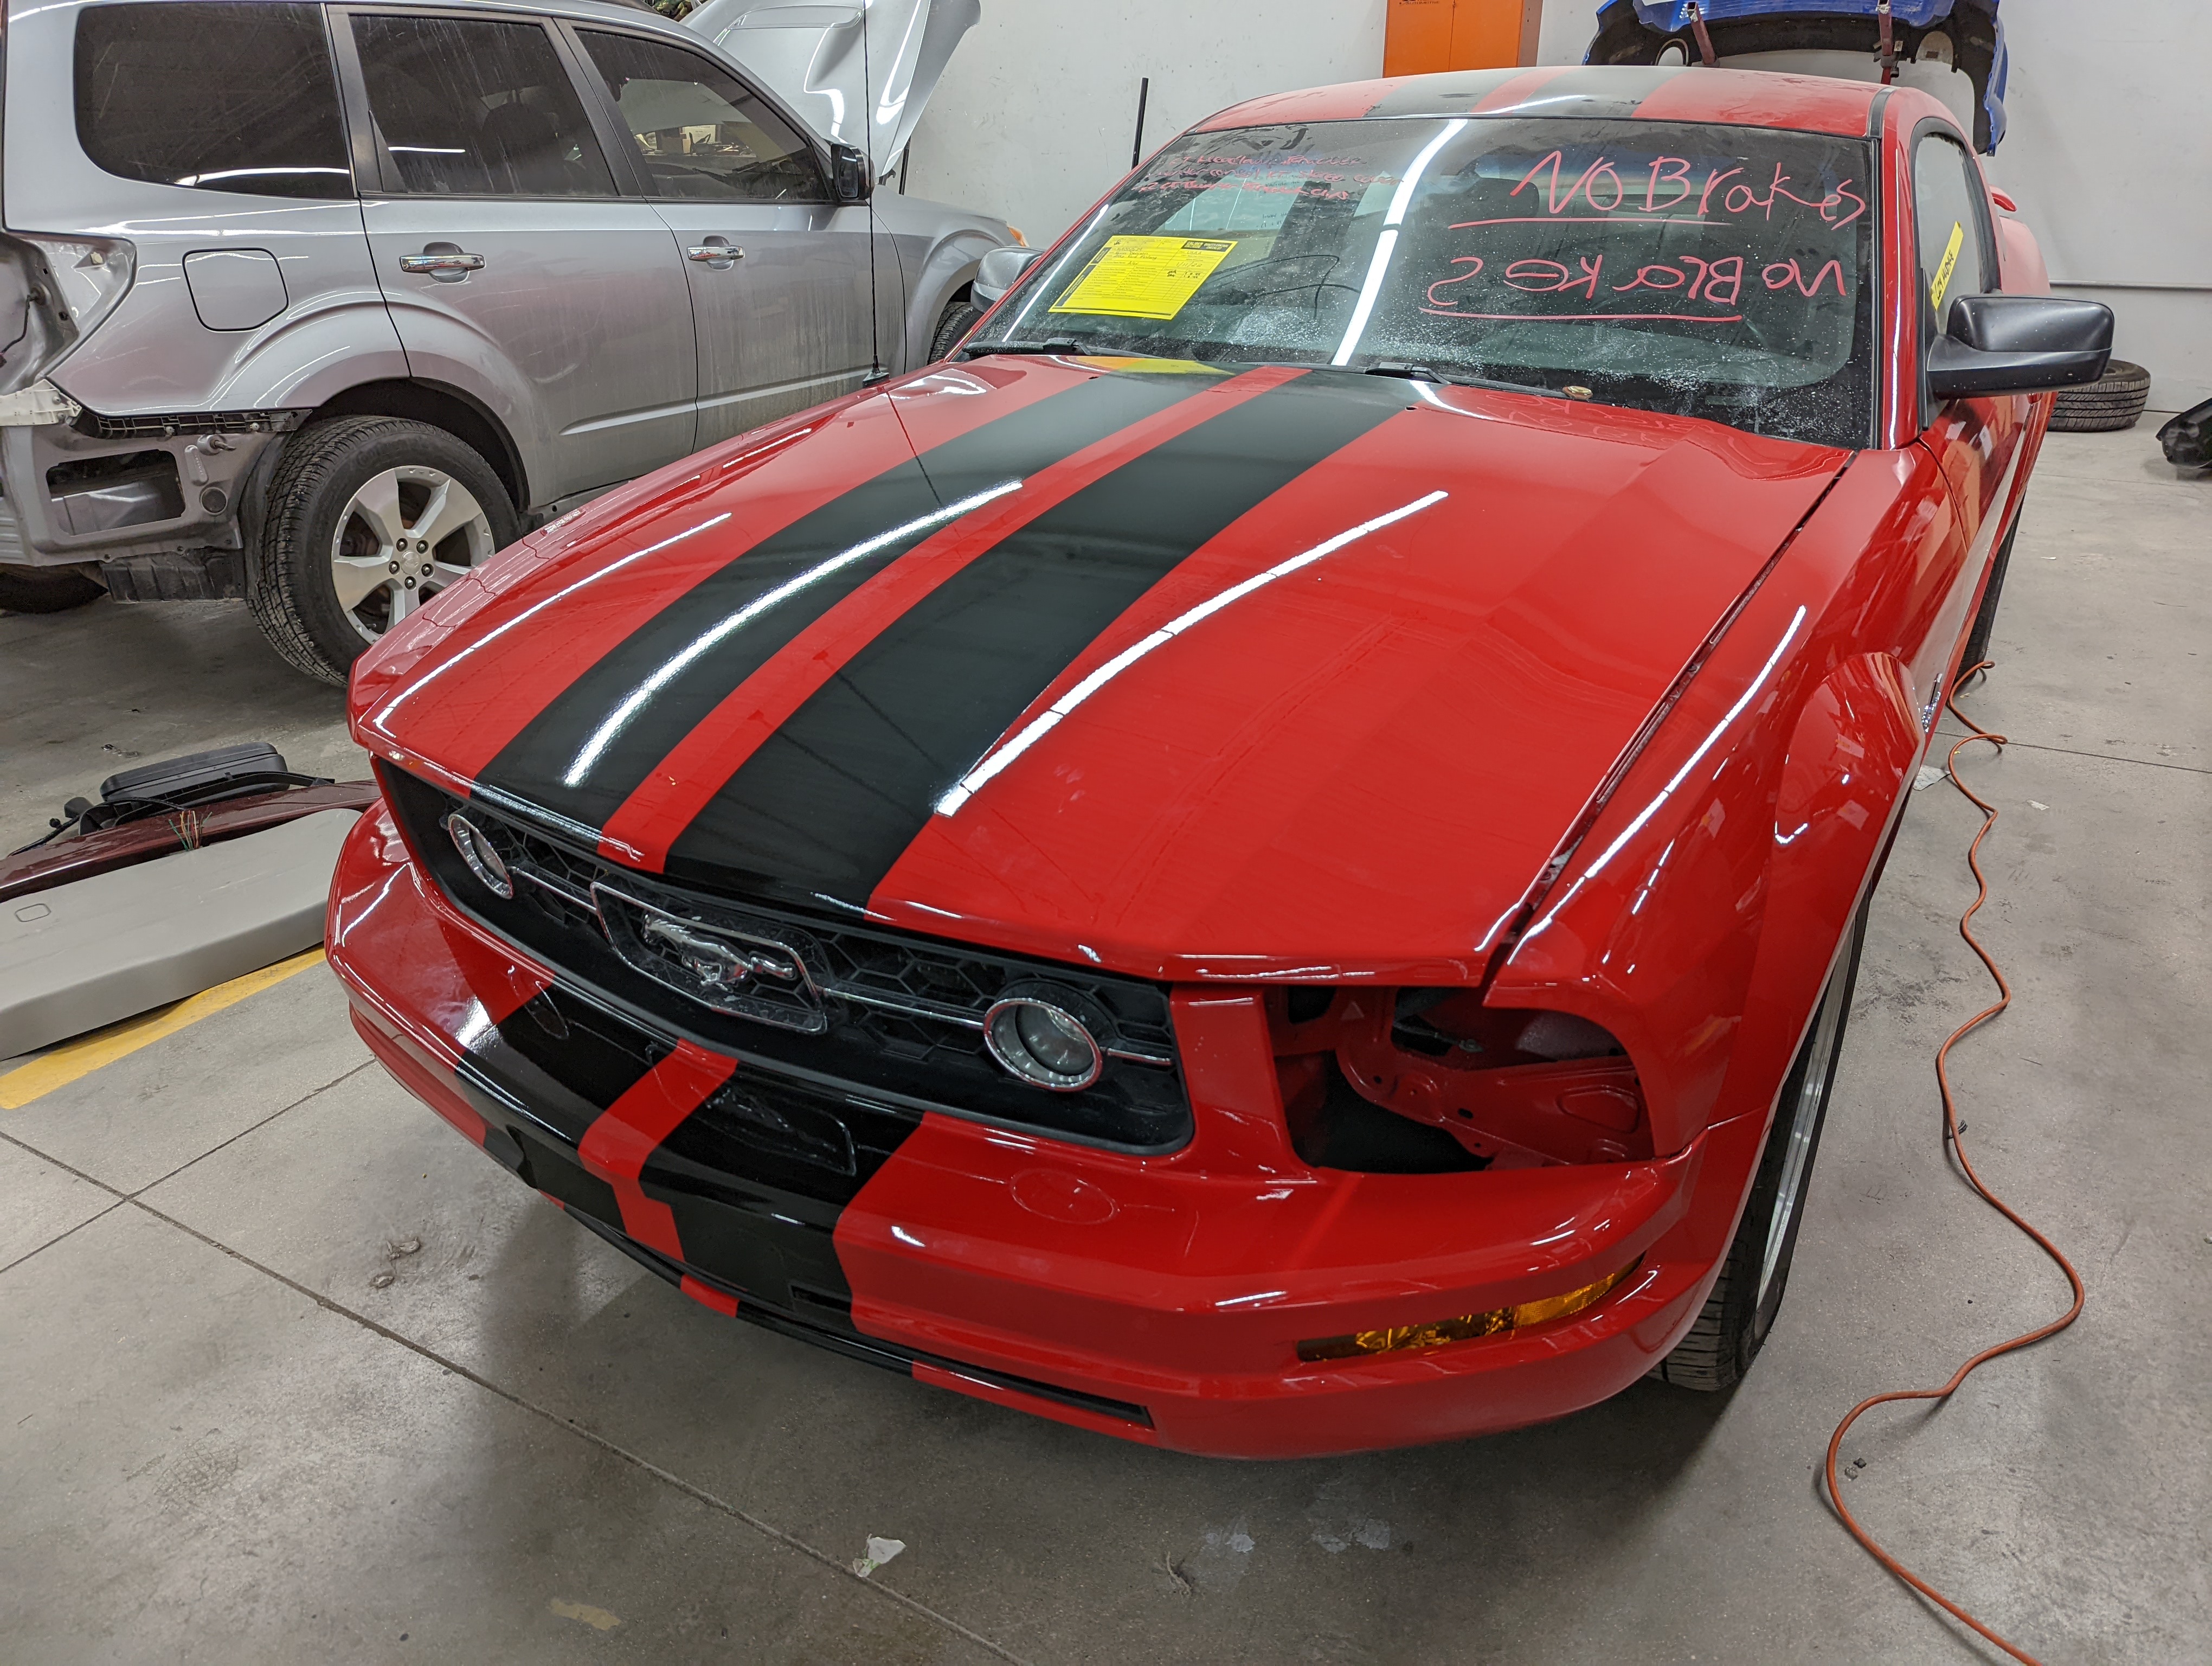 2006 Ford Mustang Vinyl Stripes. Finished product.